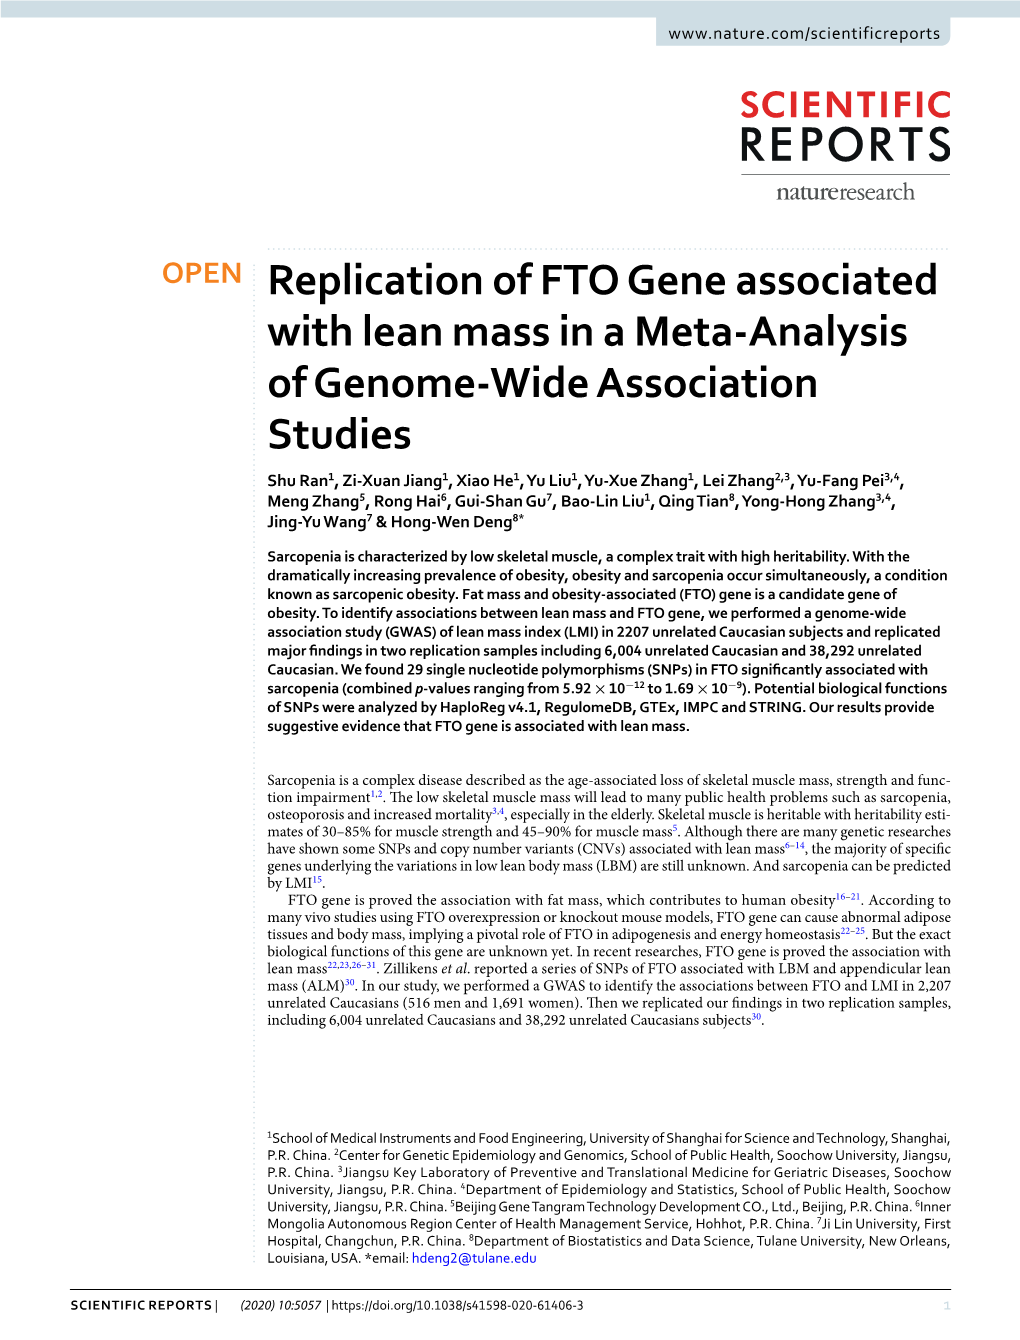 Replication of FTO Gene Associated with Lean Mass in a Meta